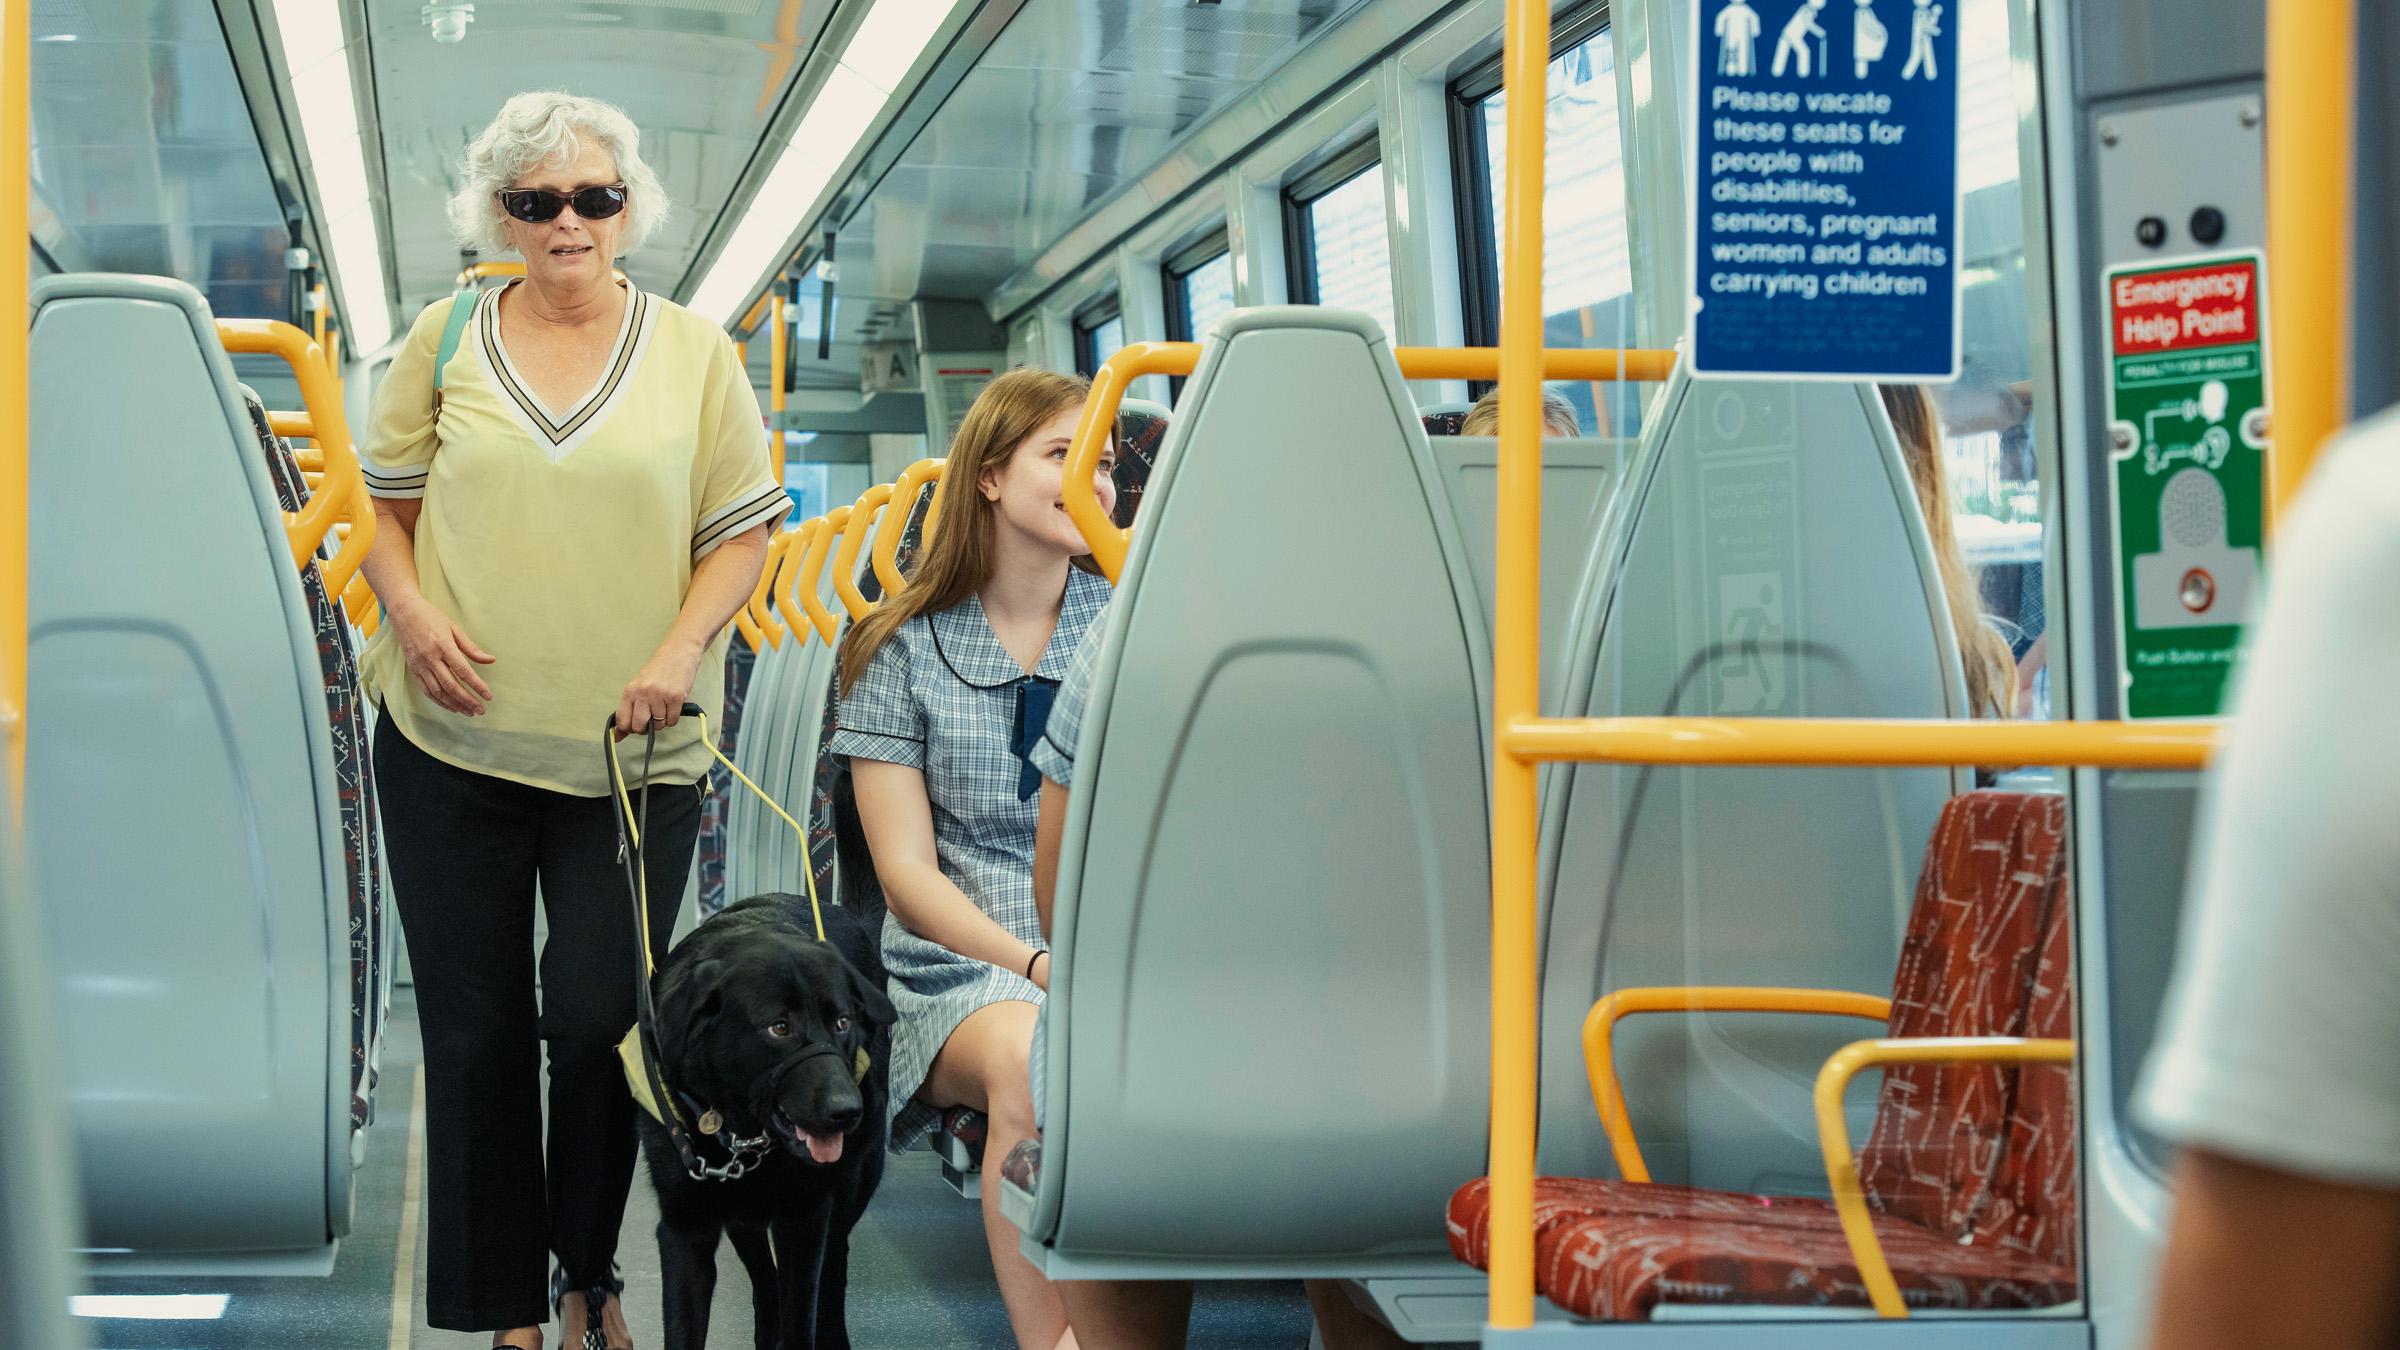 A person being led by a guide dog, walking through a train carriage